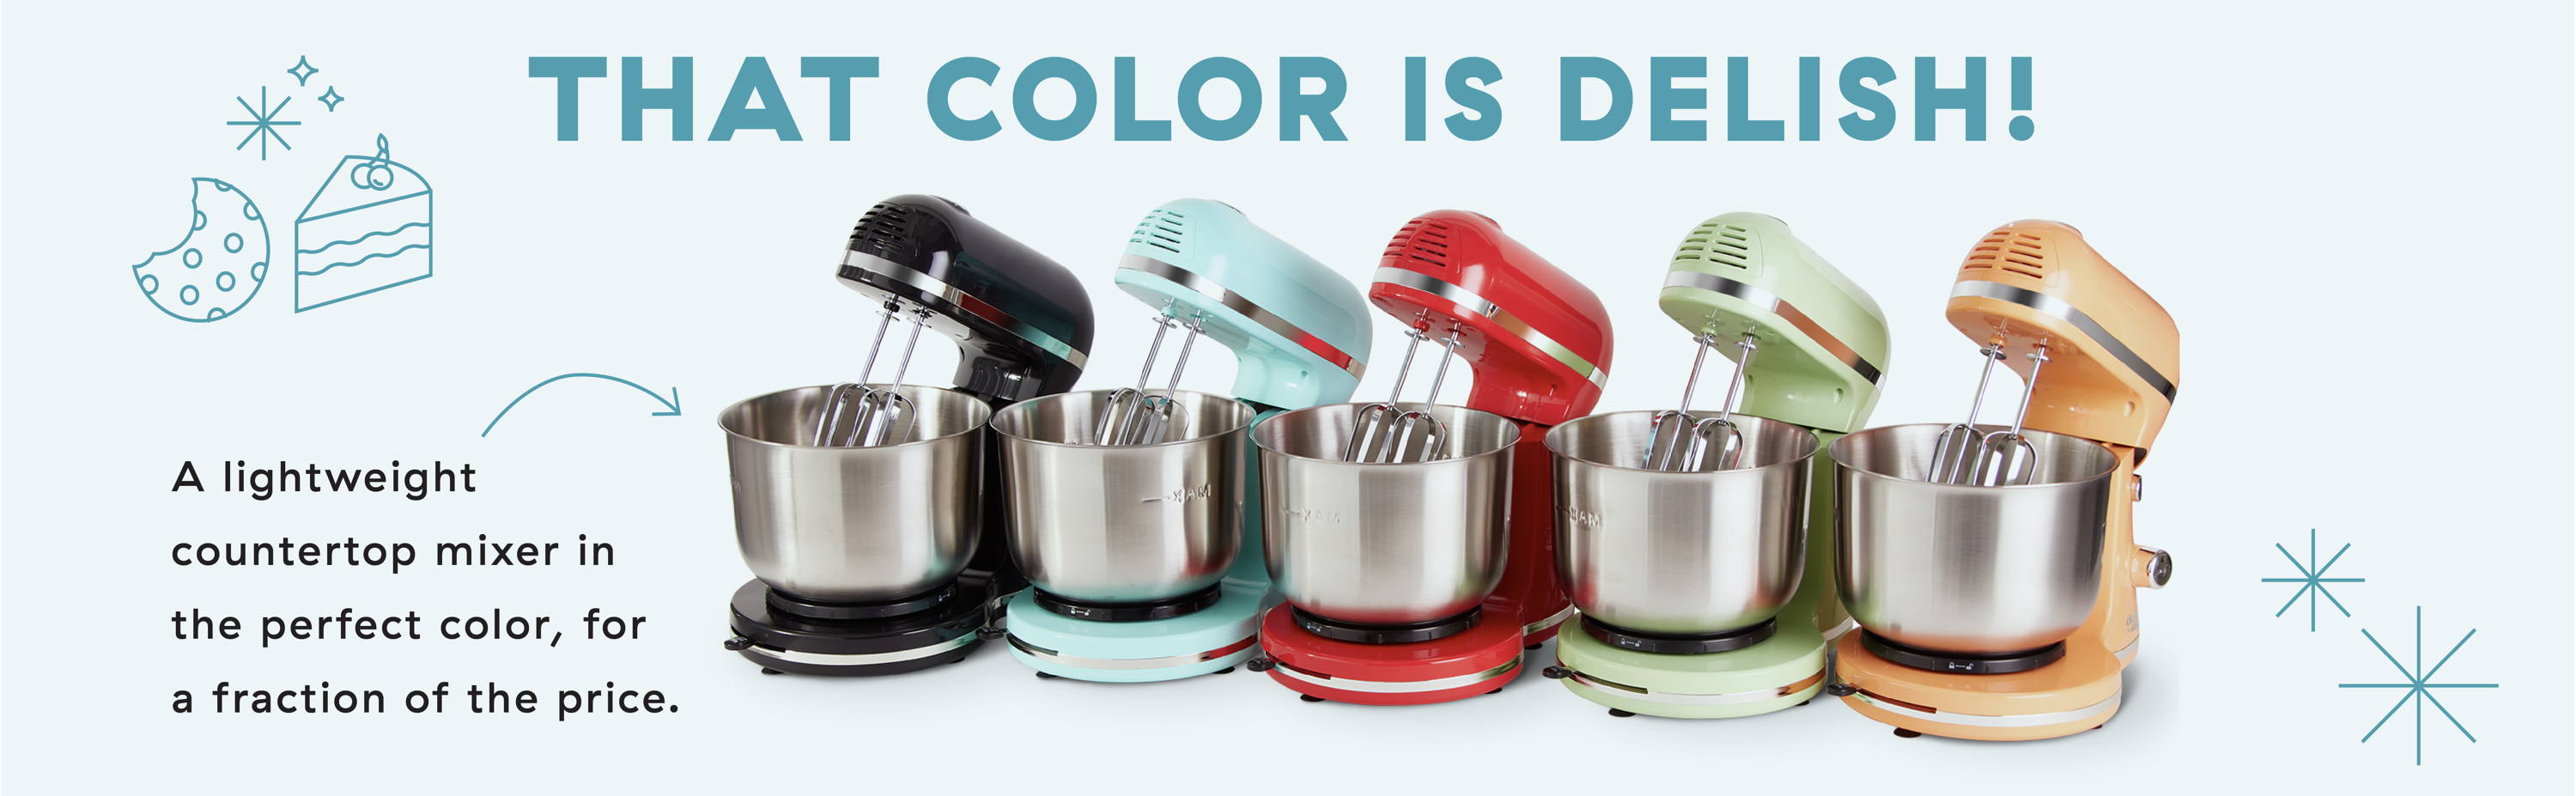 A lightweight countertop mixer in the perfect color, for a fraction of the price. 